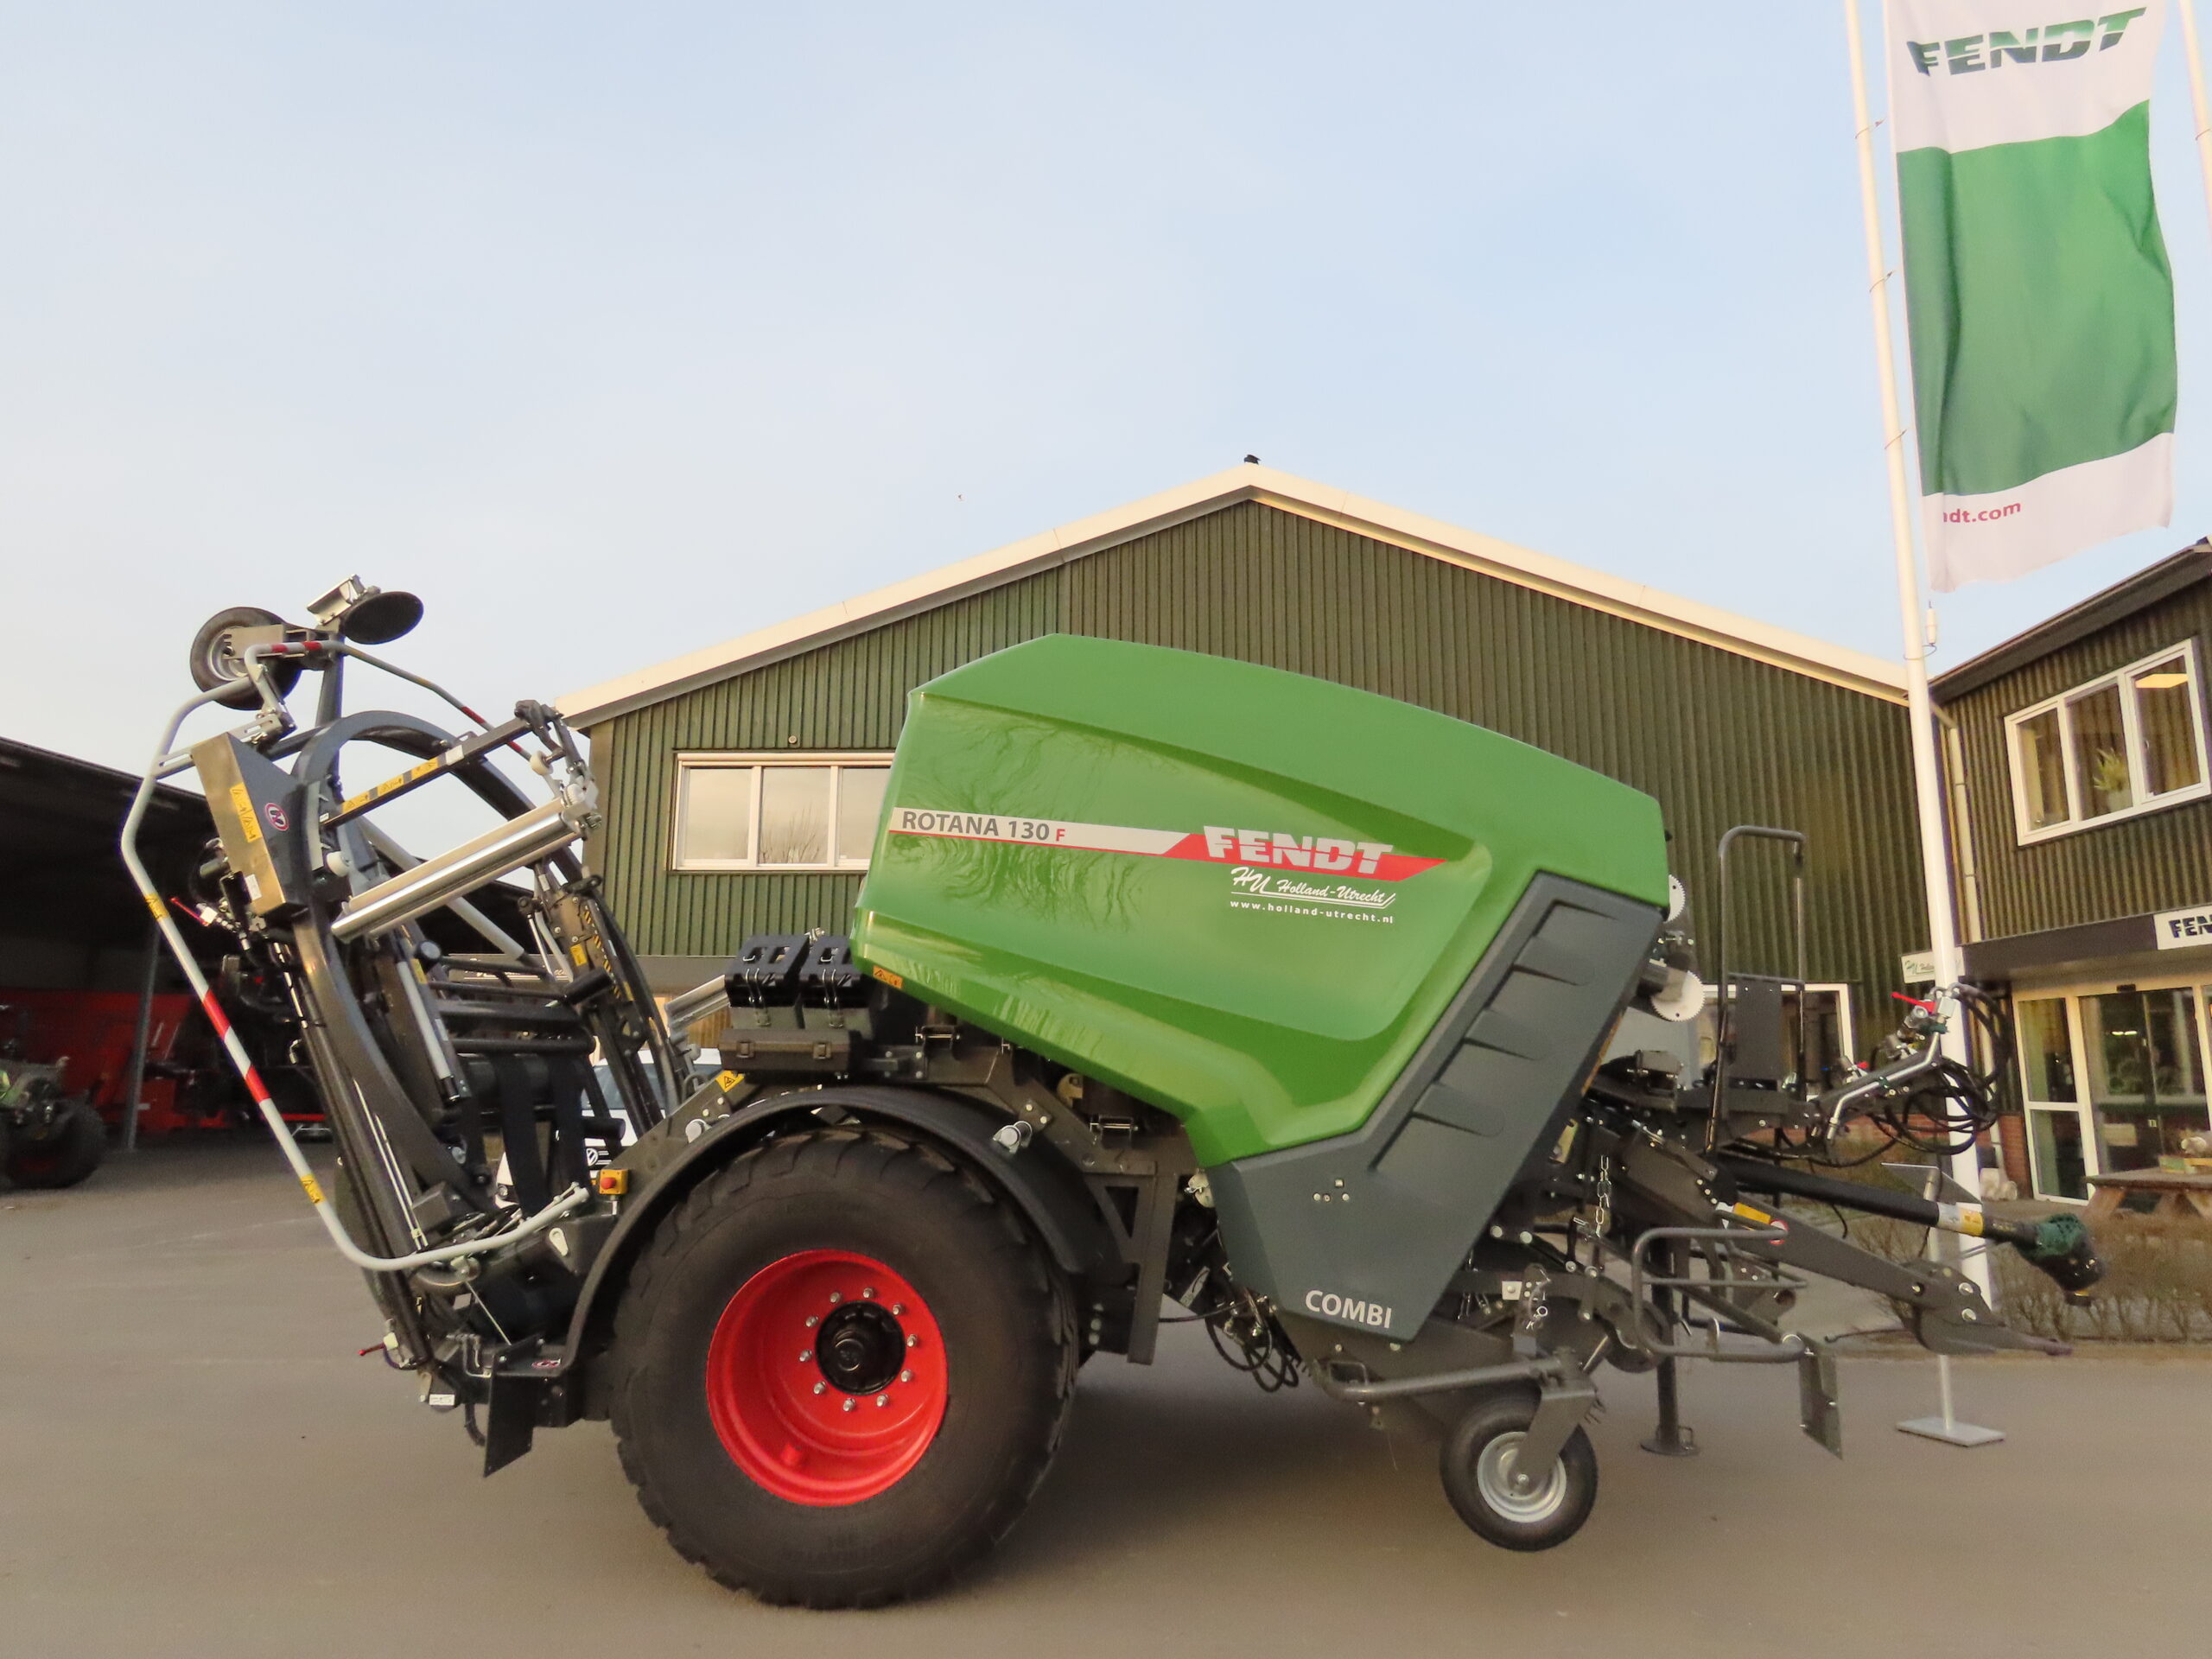 Featured image for “Fendt Rotana 130 F”